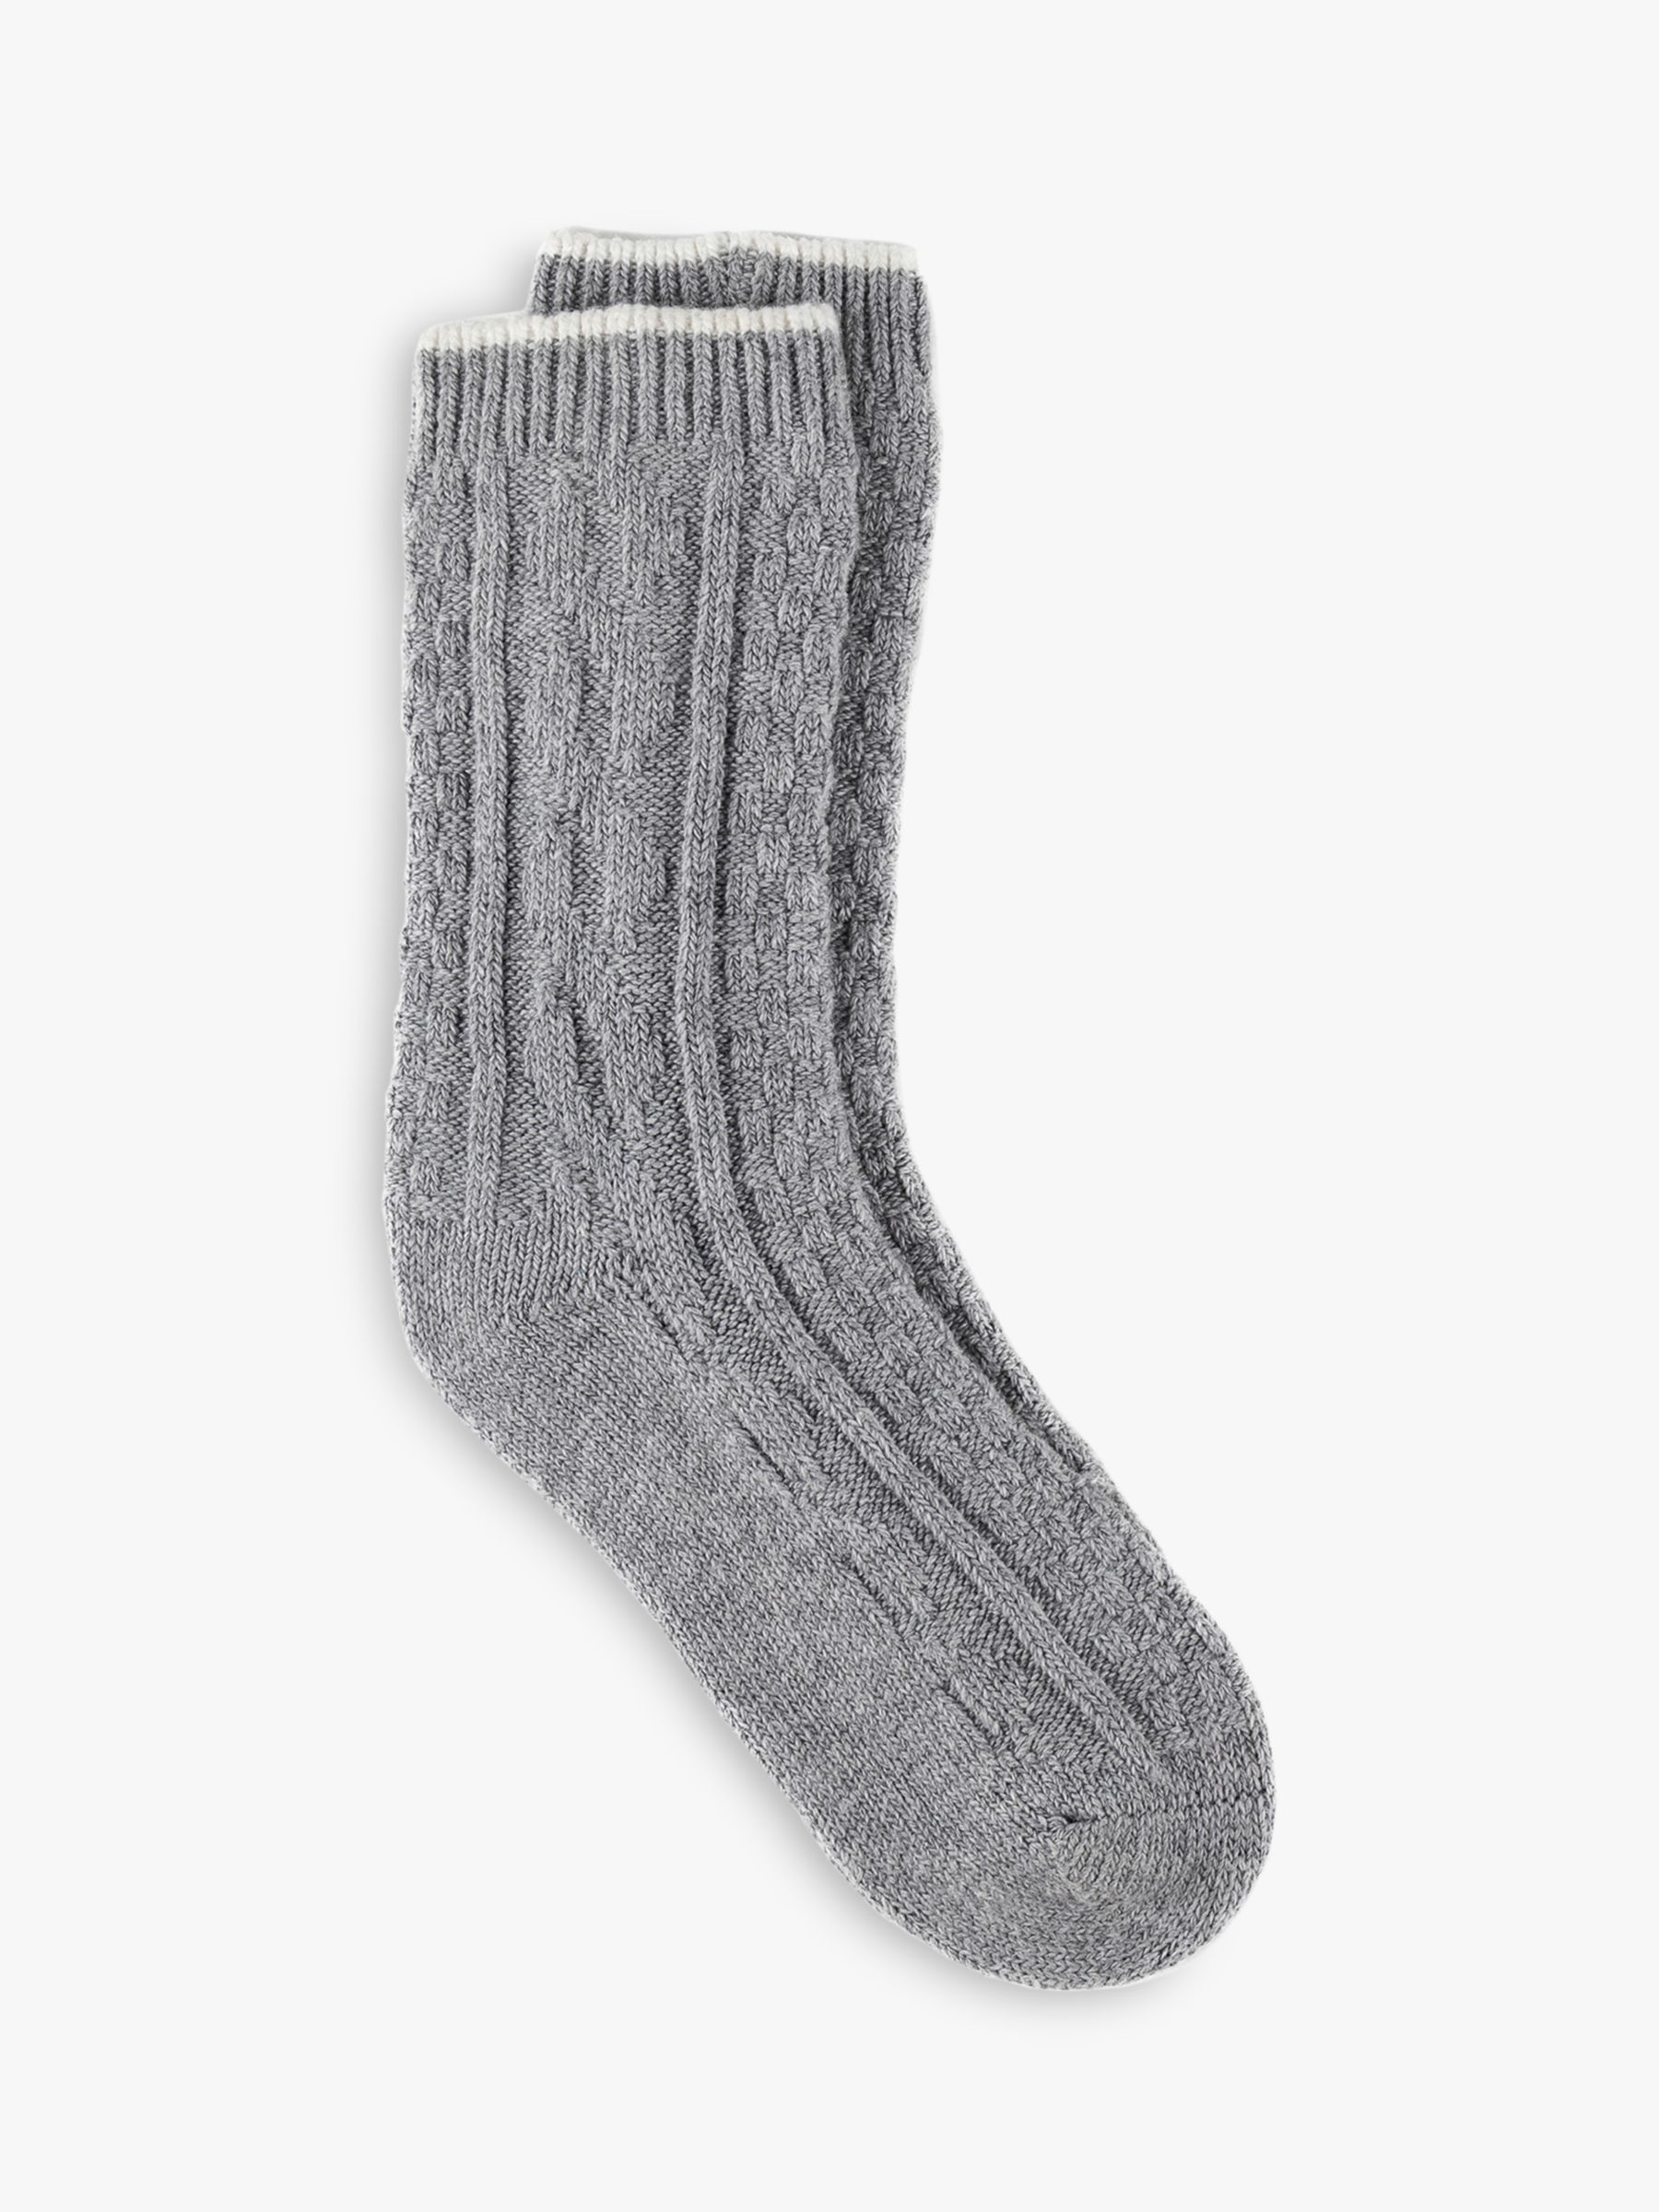 totes Cashmere Blend Slouch Socks, Grey Marl at John Lewis & Partners